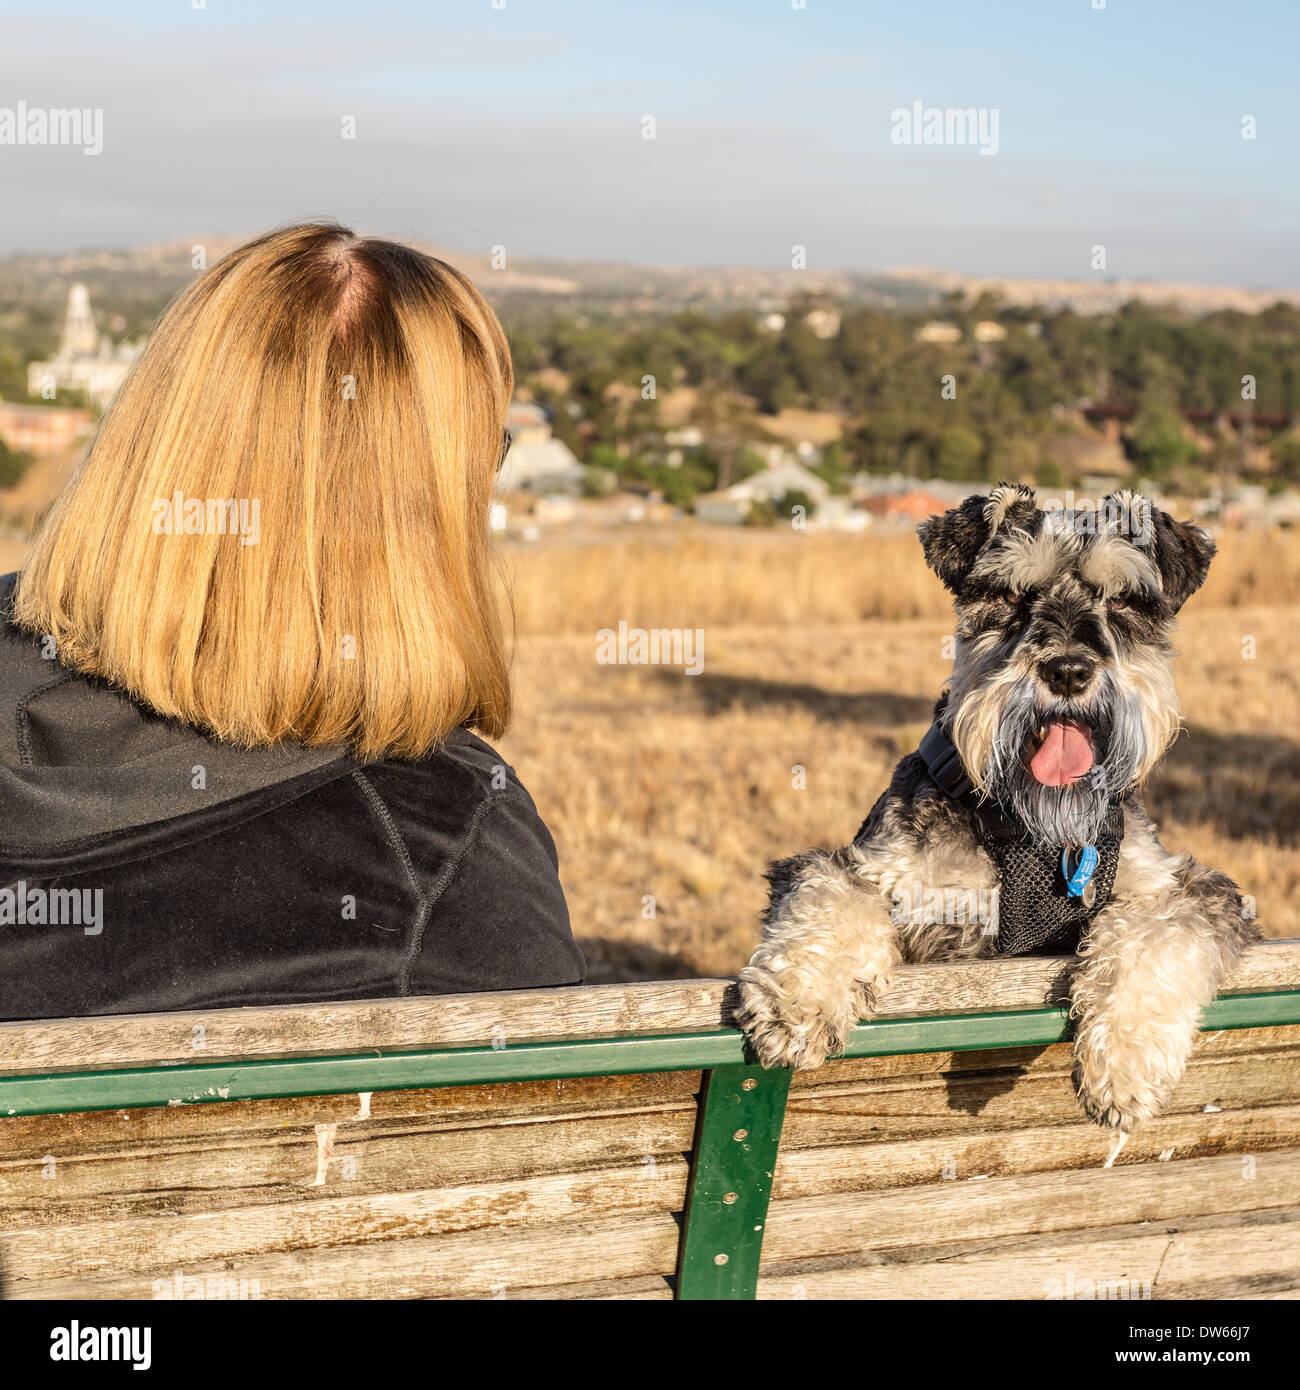 Senior lady on park bench with puppy. Stock Photo